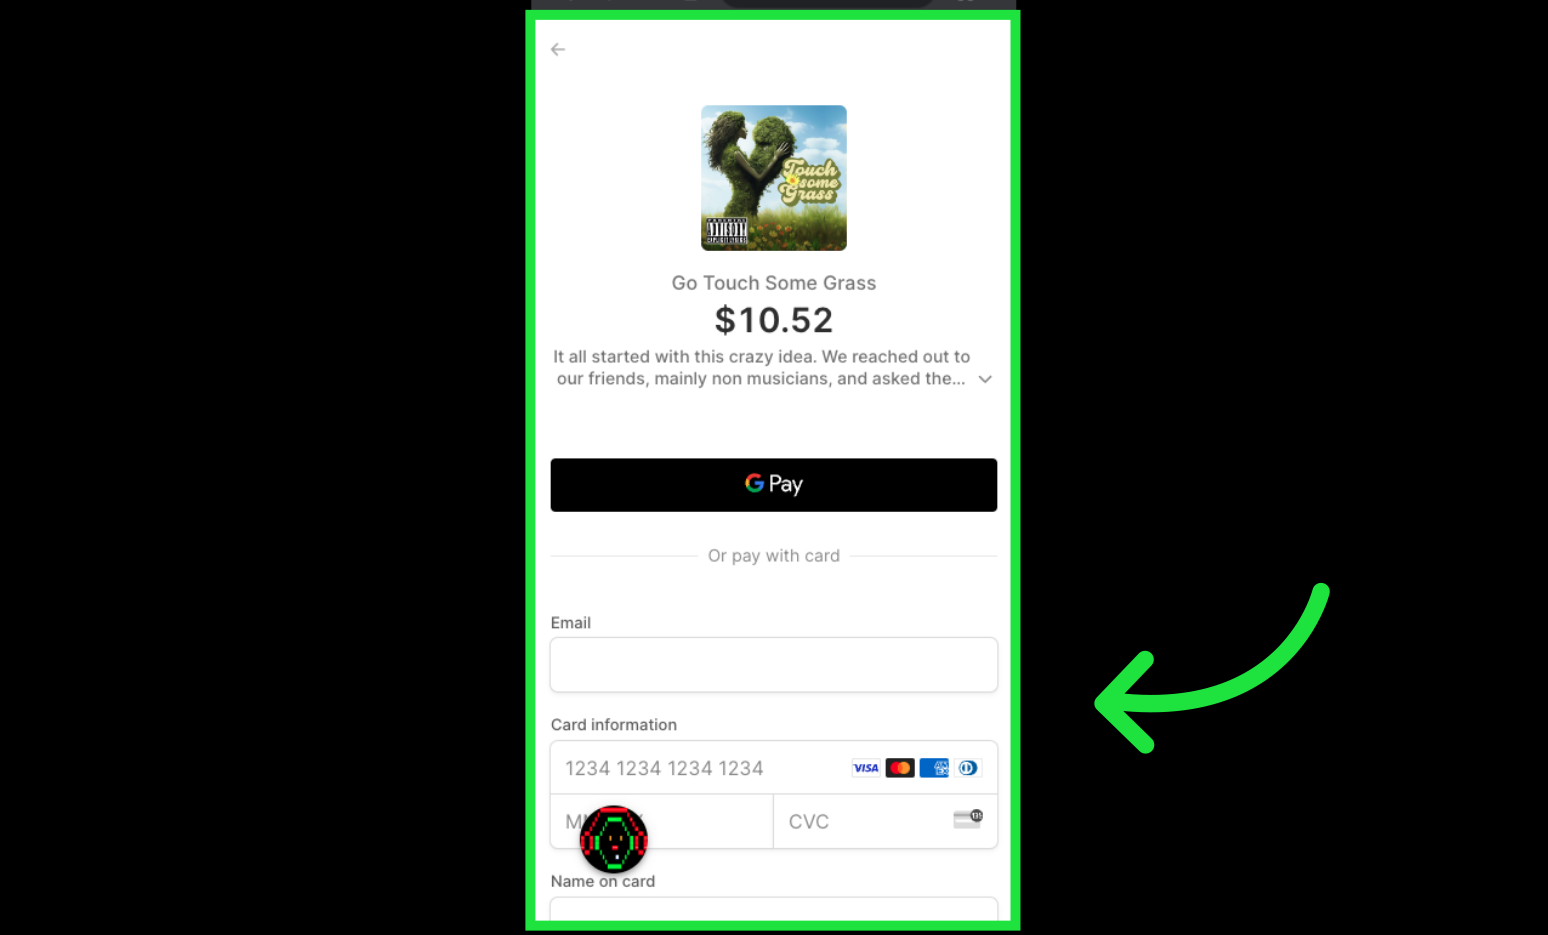 Use Google Pay, Apple Pay, or enter credit card details